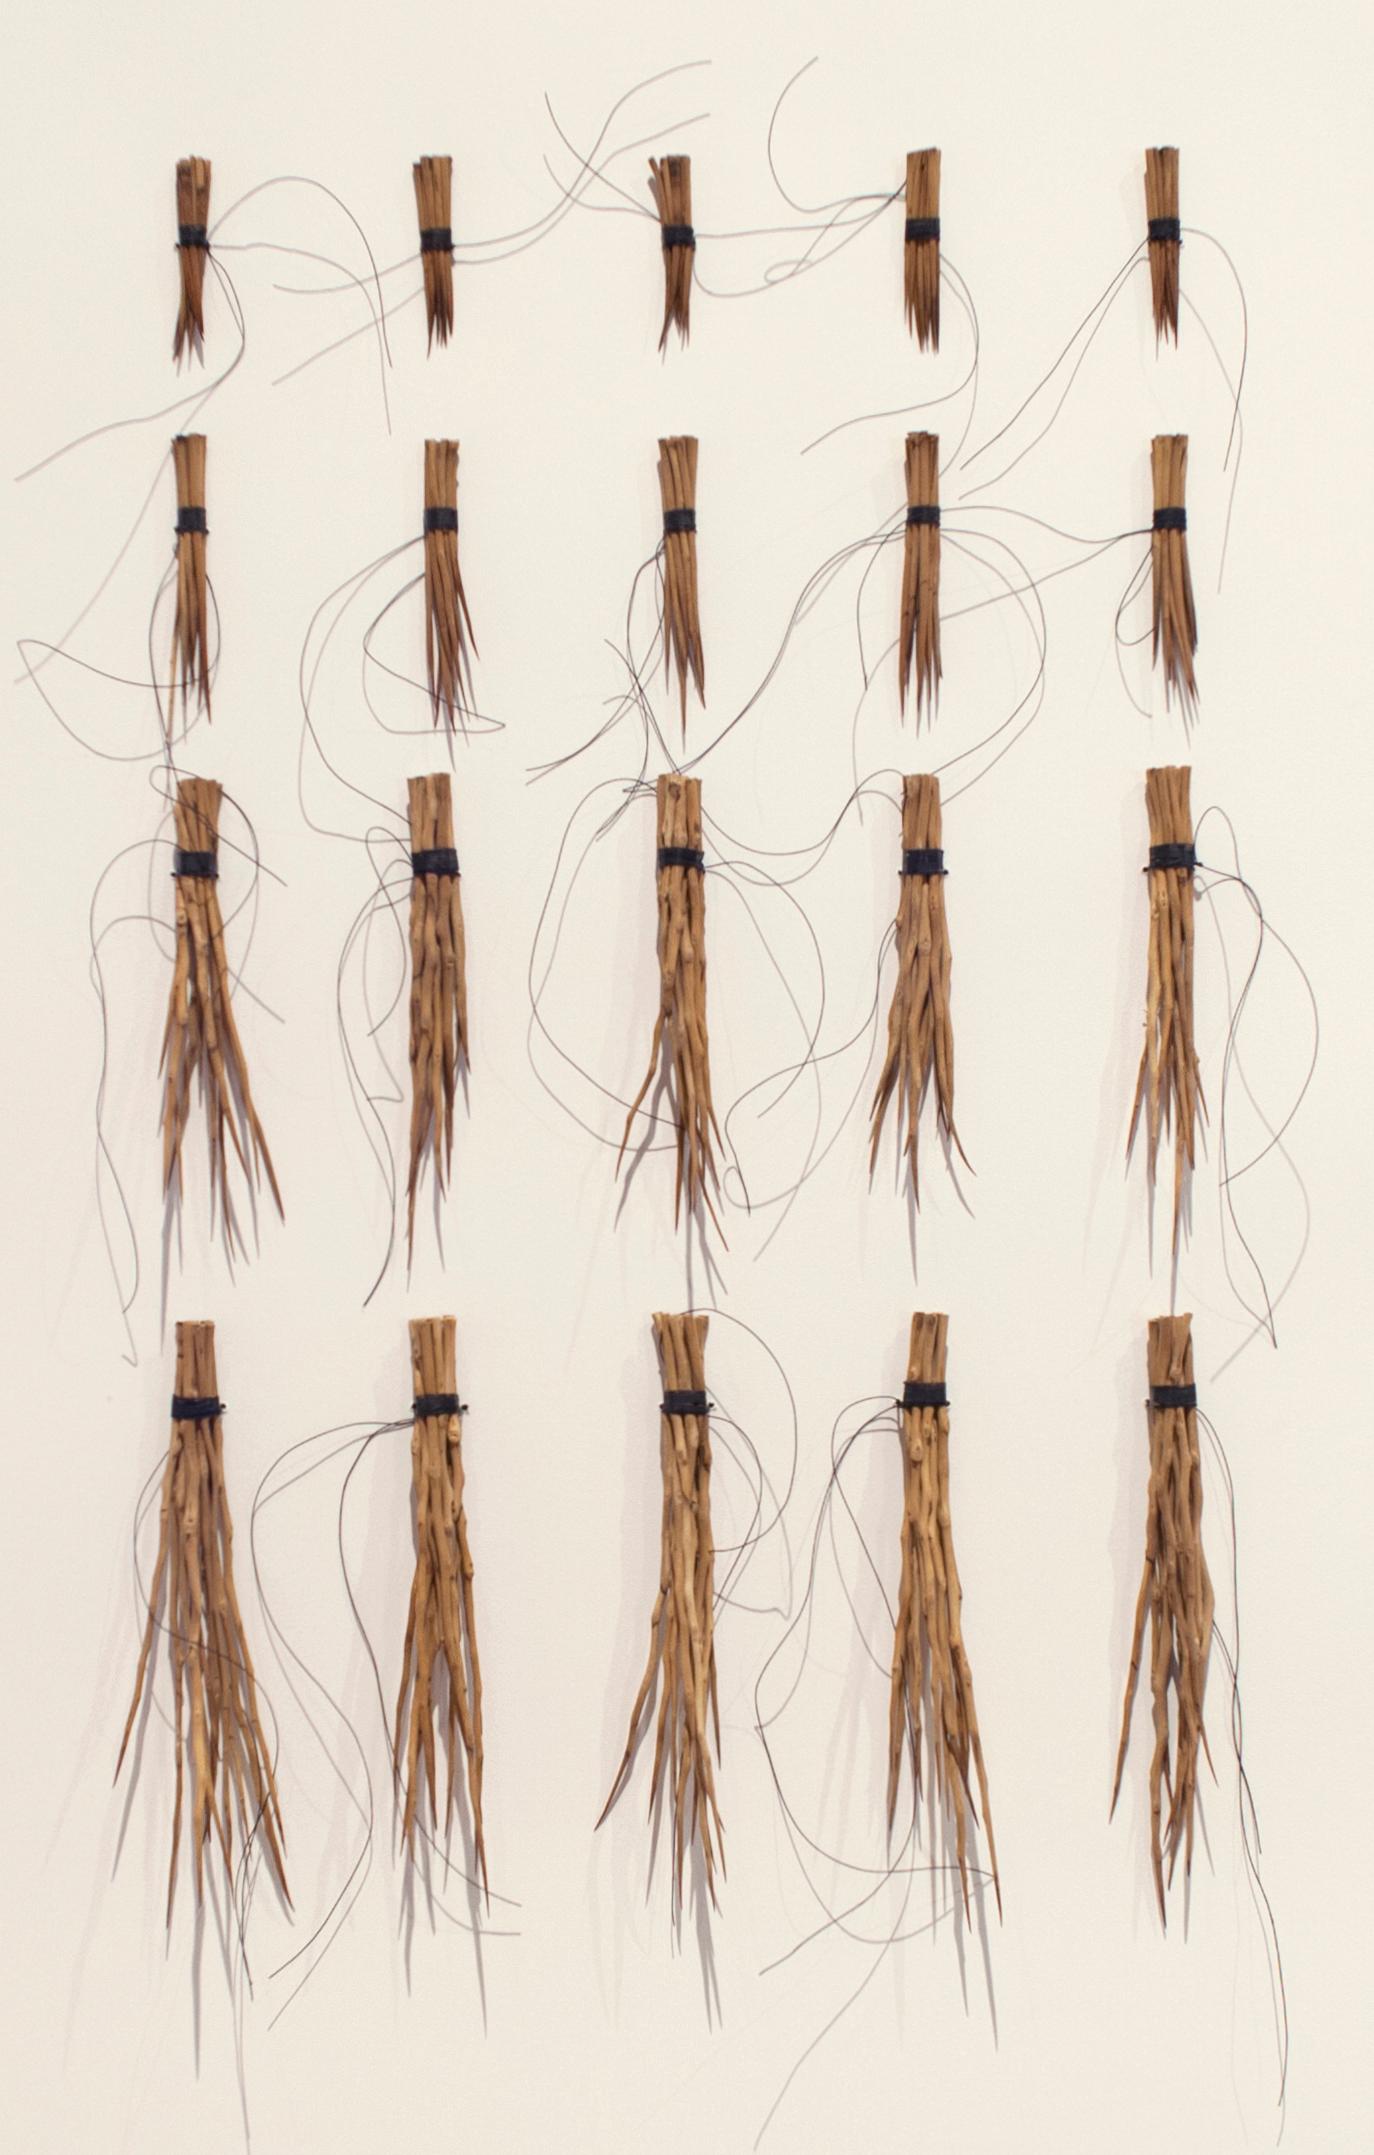 An Whitlock is a Canadian artist living and working in Paris, Ontario. Her work takes inspiration from the Canadian wilderness and landscape, and she often uses artifacts from nature in her pieces. Thorn Bundles is a series of meticulously collected